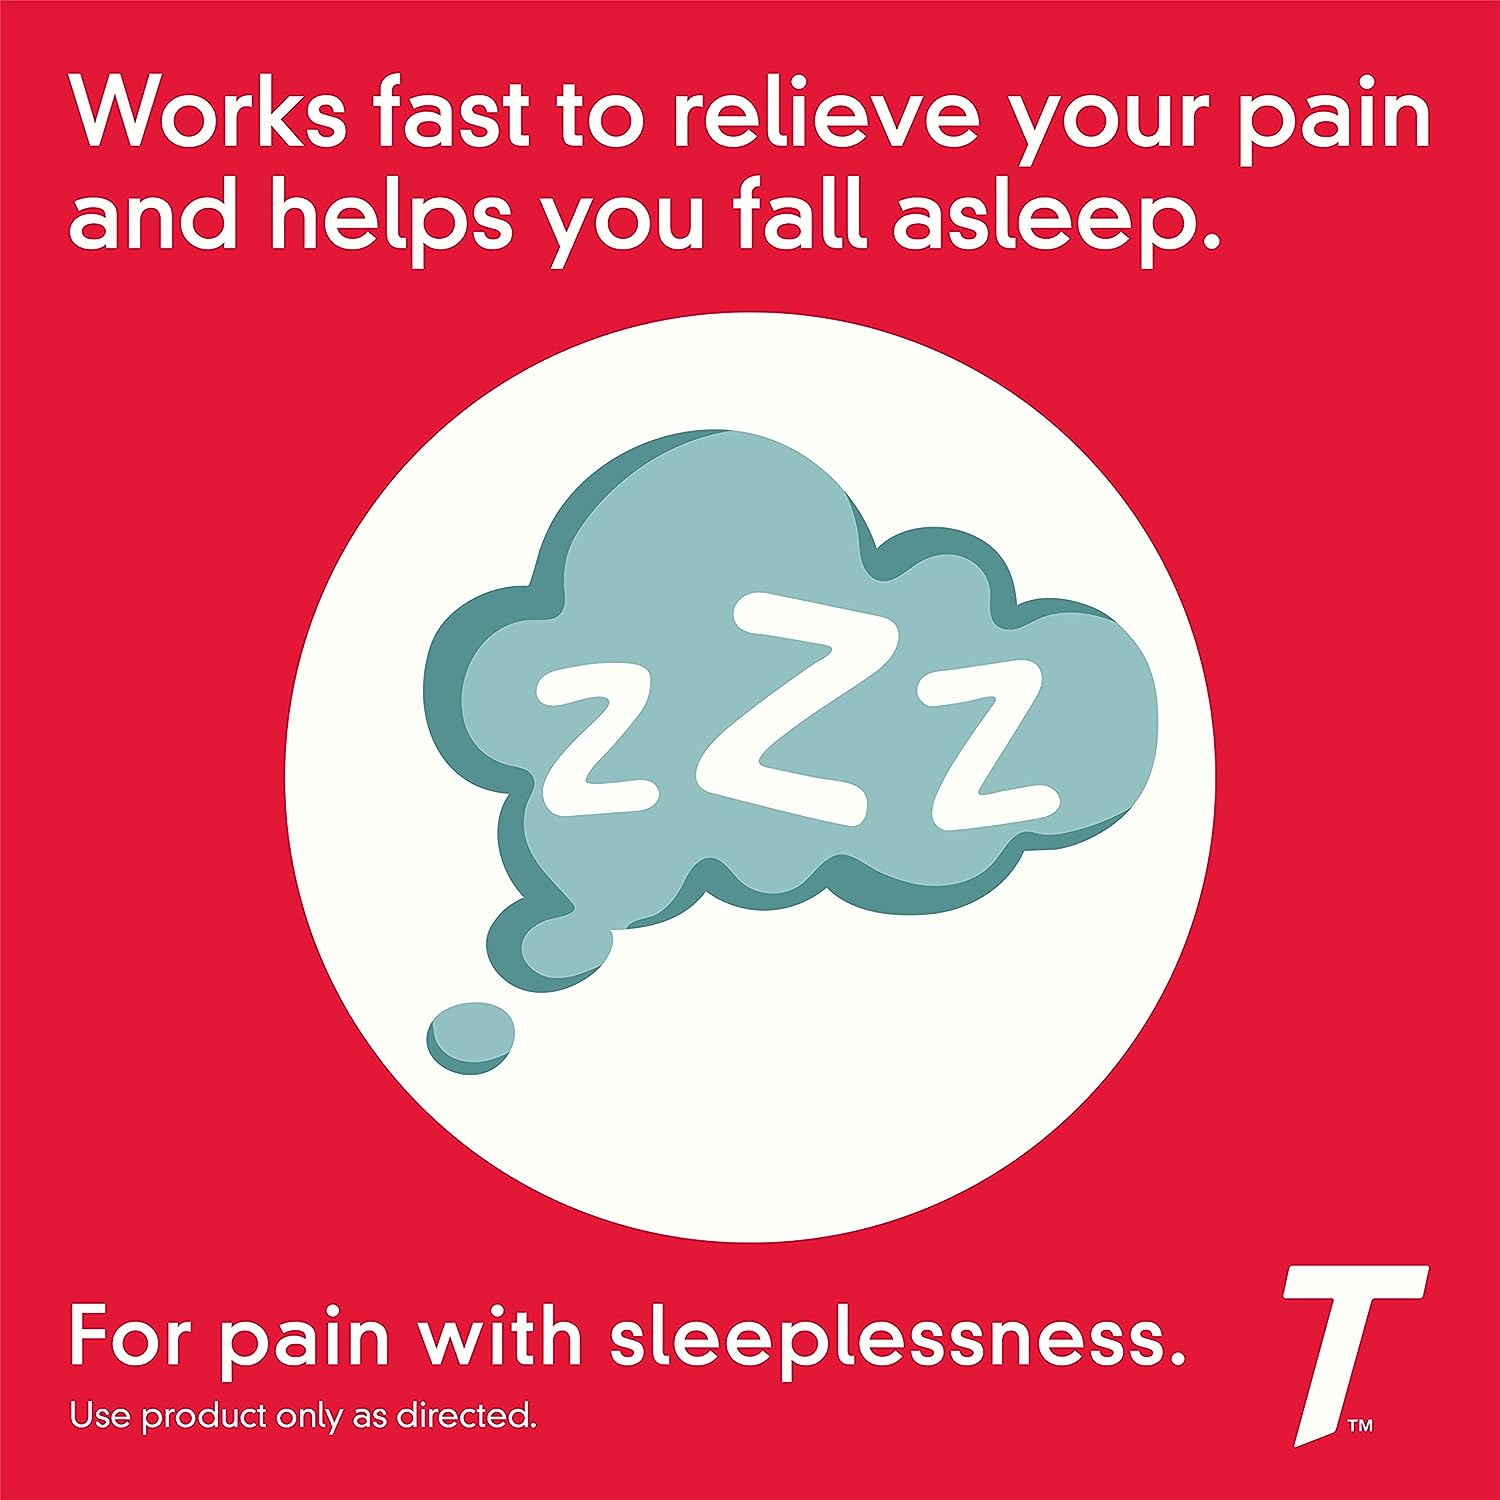 Tylenol PM Extra Strength Nighttime Pain Reliever & Sleep Aid Caplets, 500 mg Acetaminophen & 25 mg Diphenhydramine HCl, Relief for Nighttime Aches & Pains, Non-Habit Forming, 100 ct : Health & Household